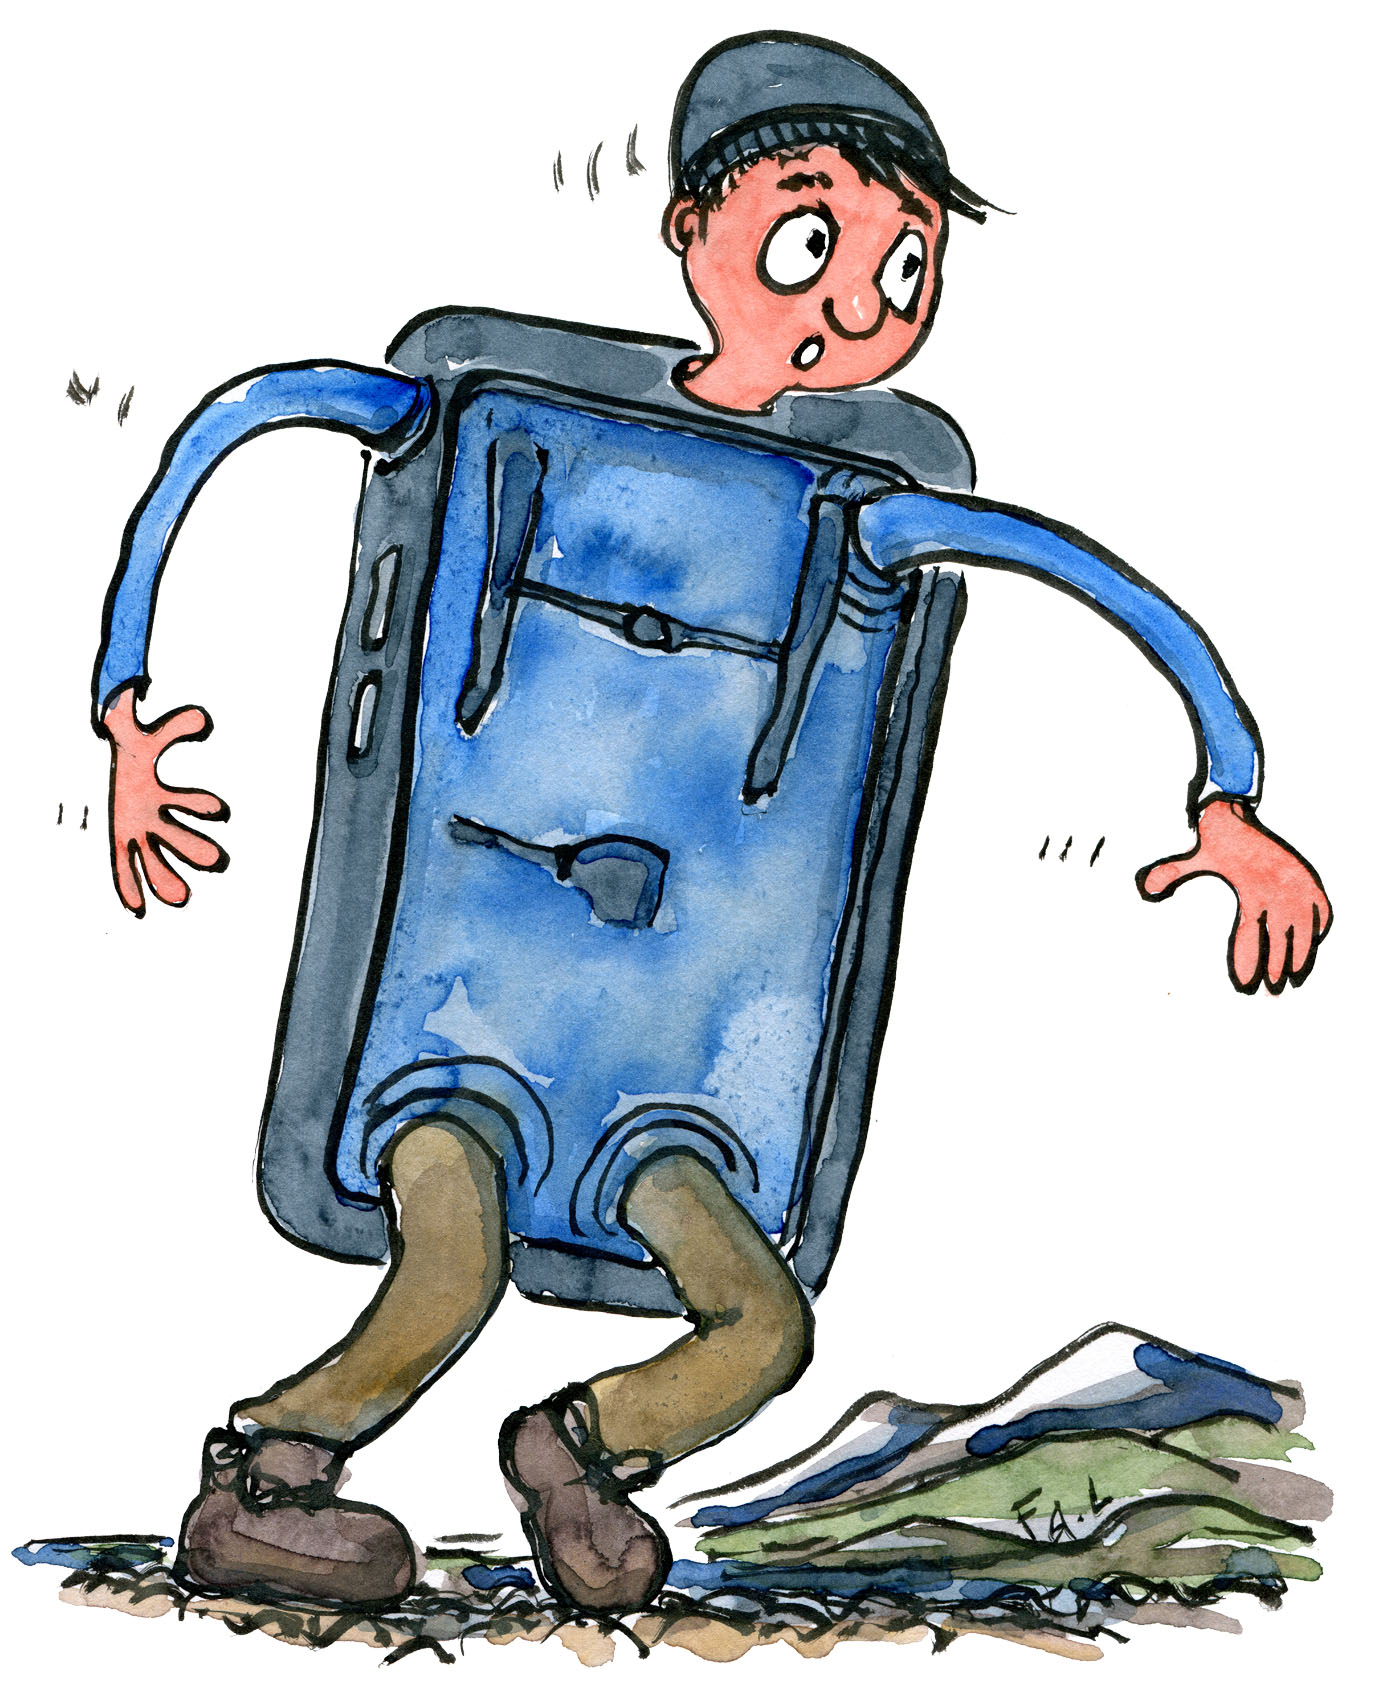 illustration by Frits Ahlefeldt of a hiker that is half evolved into a phone. drawing by Frits Ahlefeldt